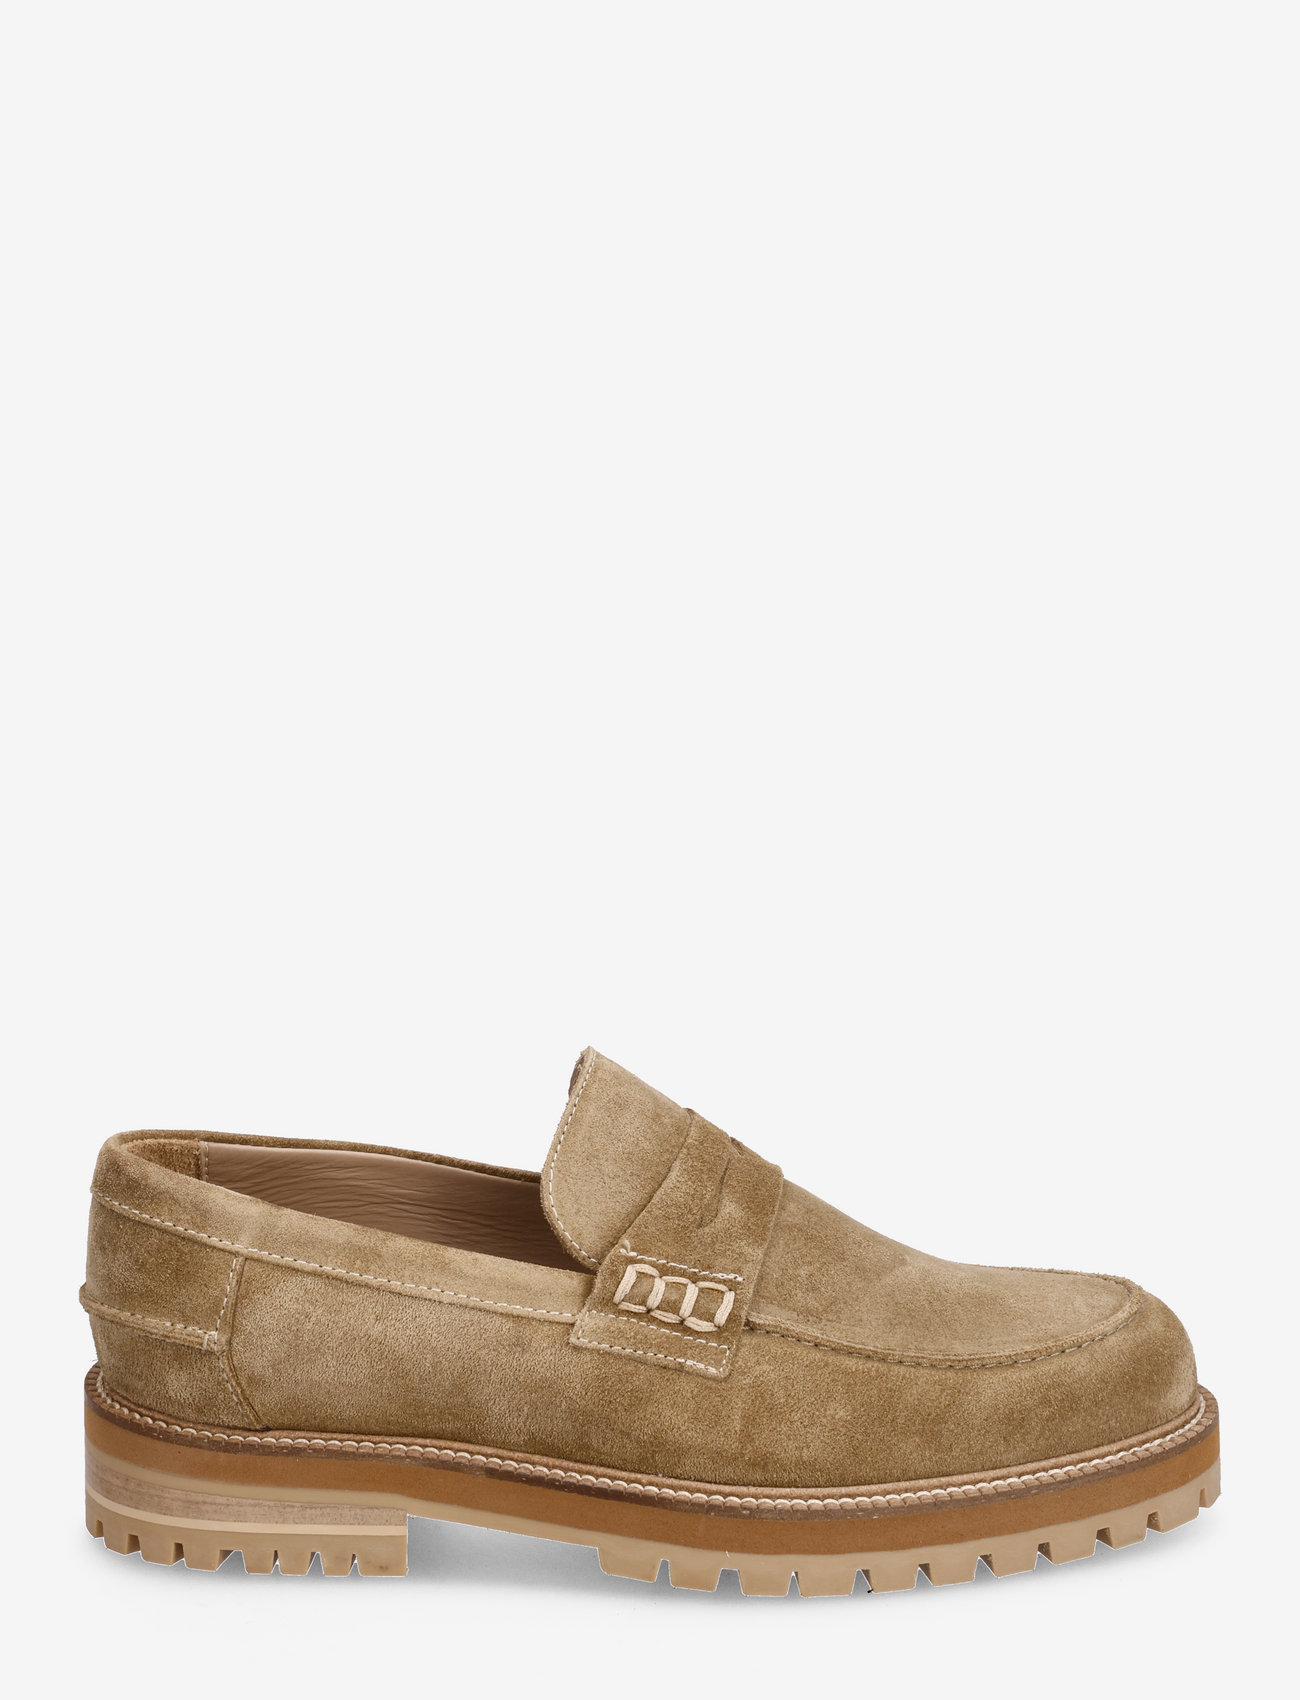 ANGULUS - Loafer - birthday gifts - 2217 sand - 1